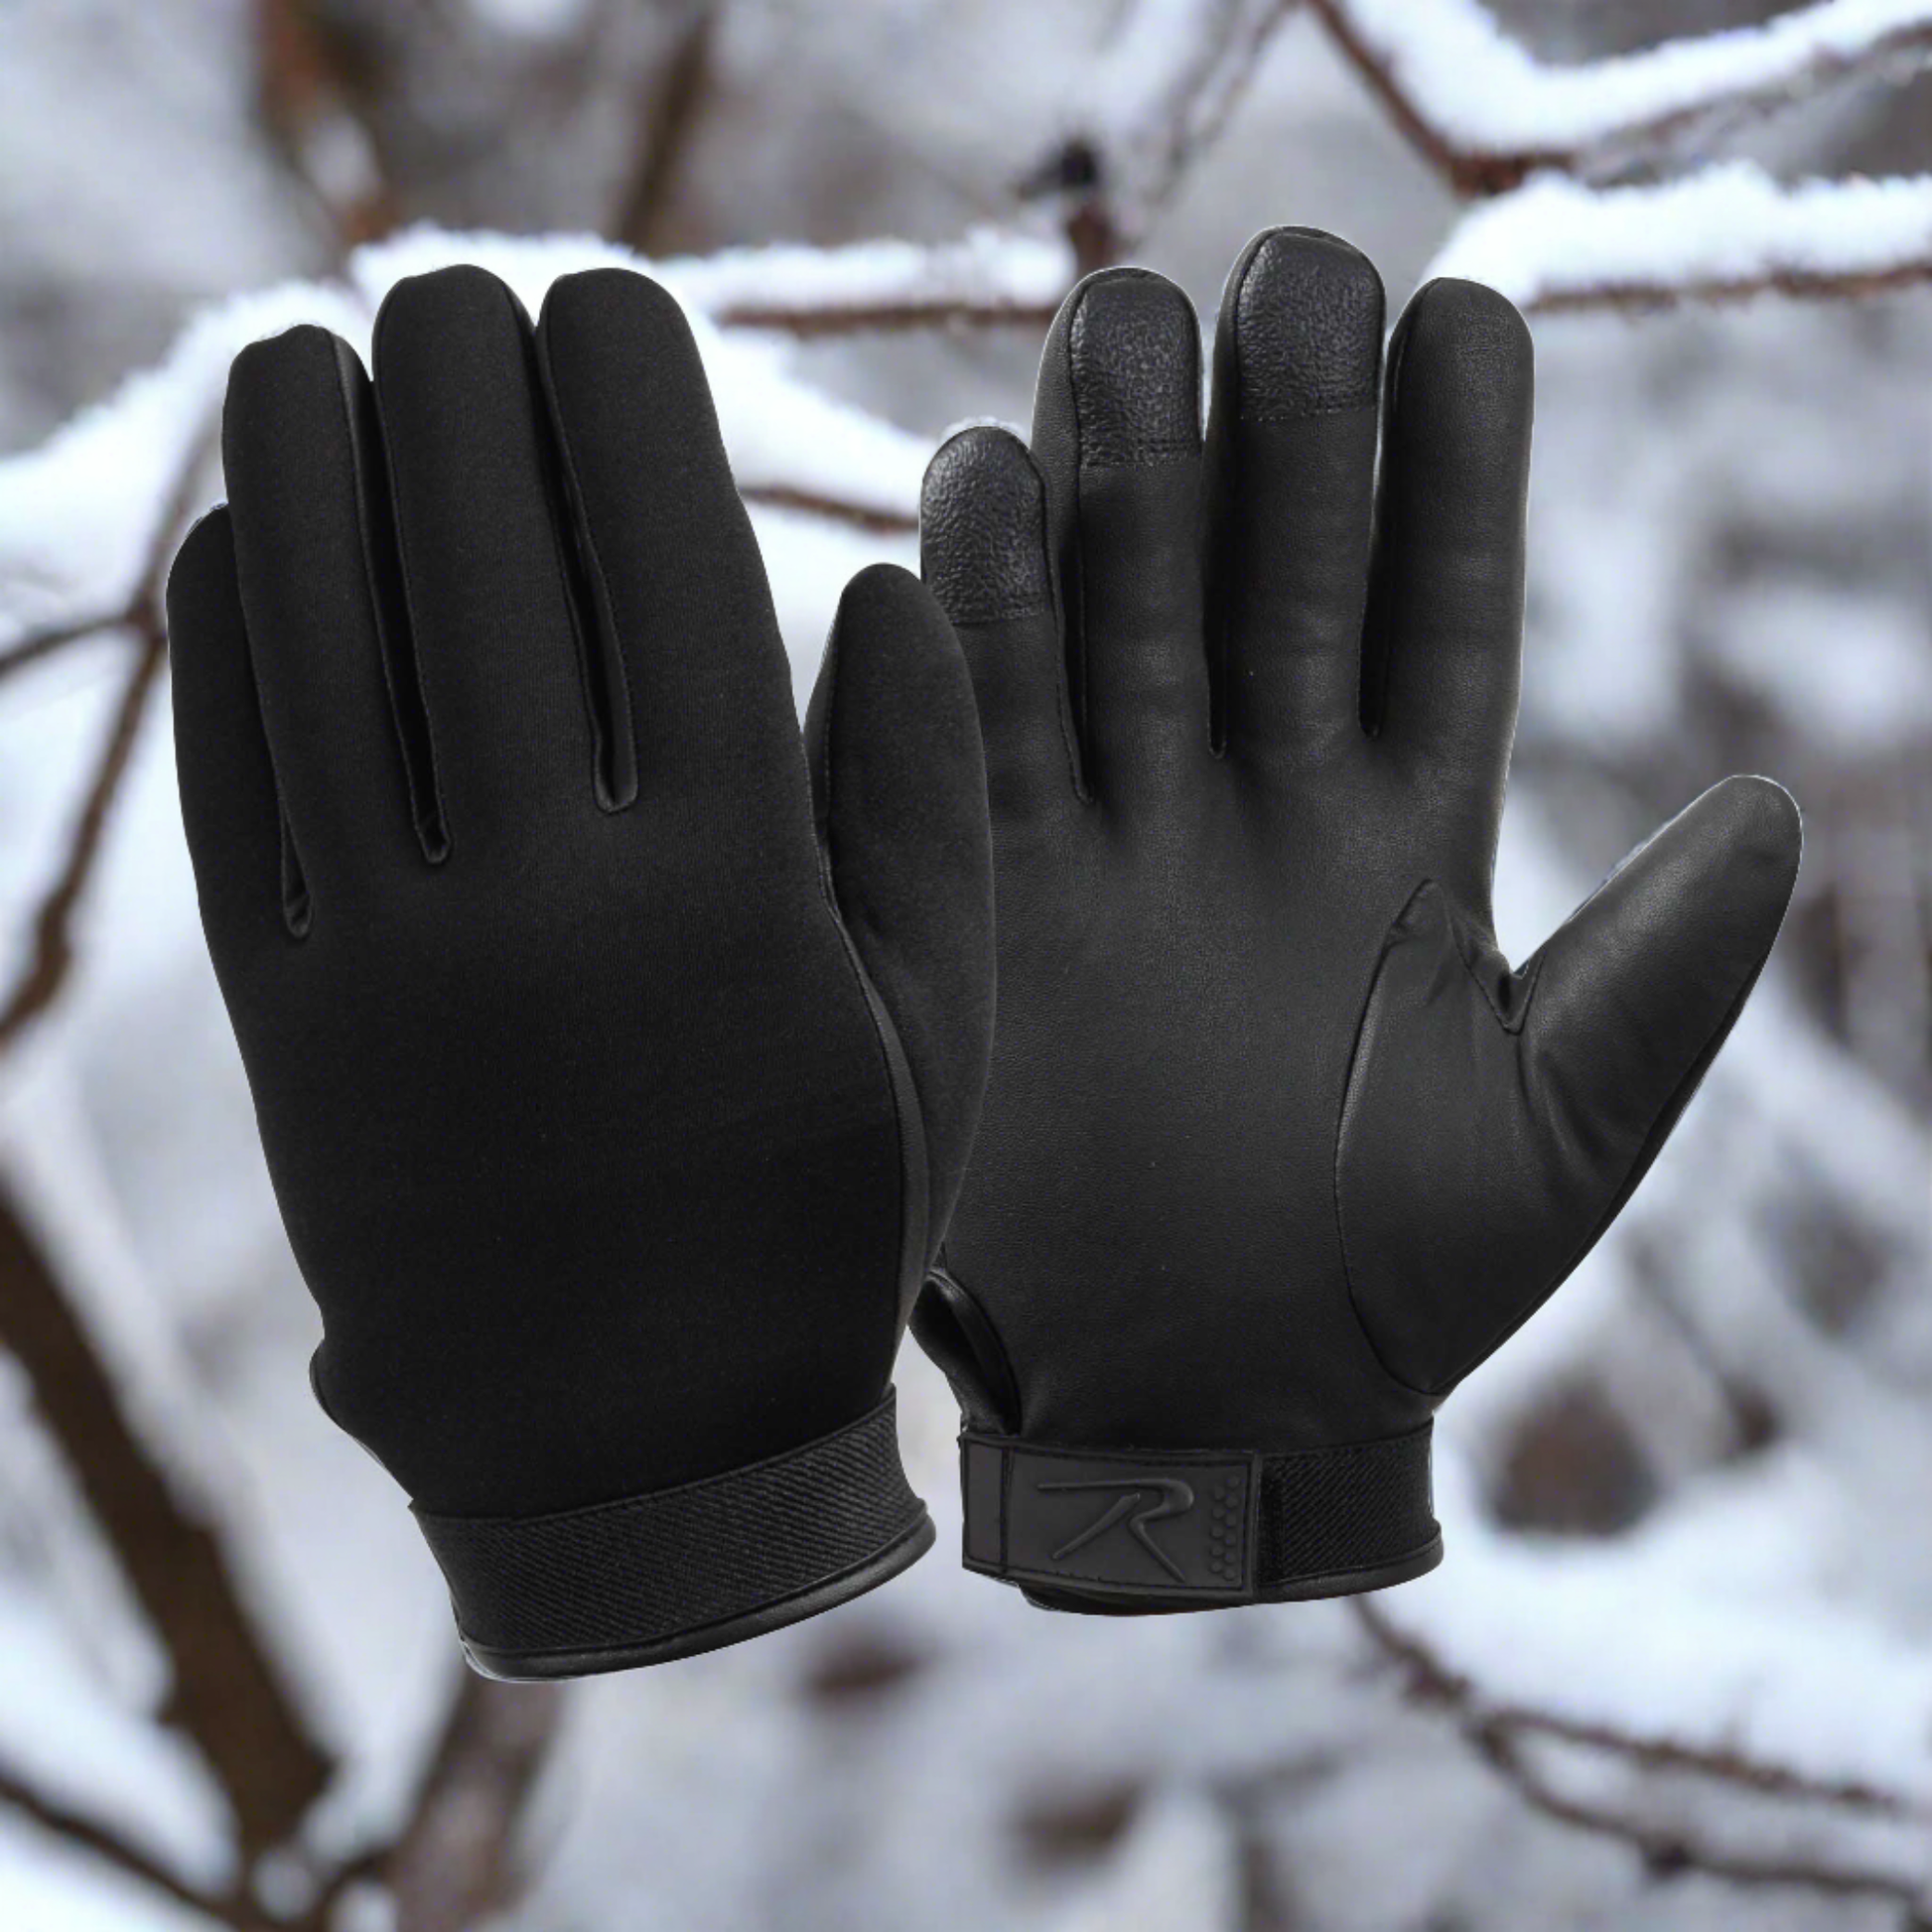 Cold Weather Gloves - Rothco Cold Weather Neoprene Duty Gloves   Black